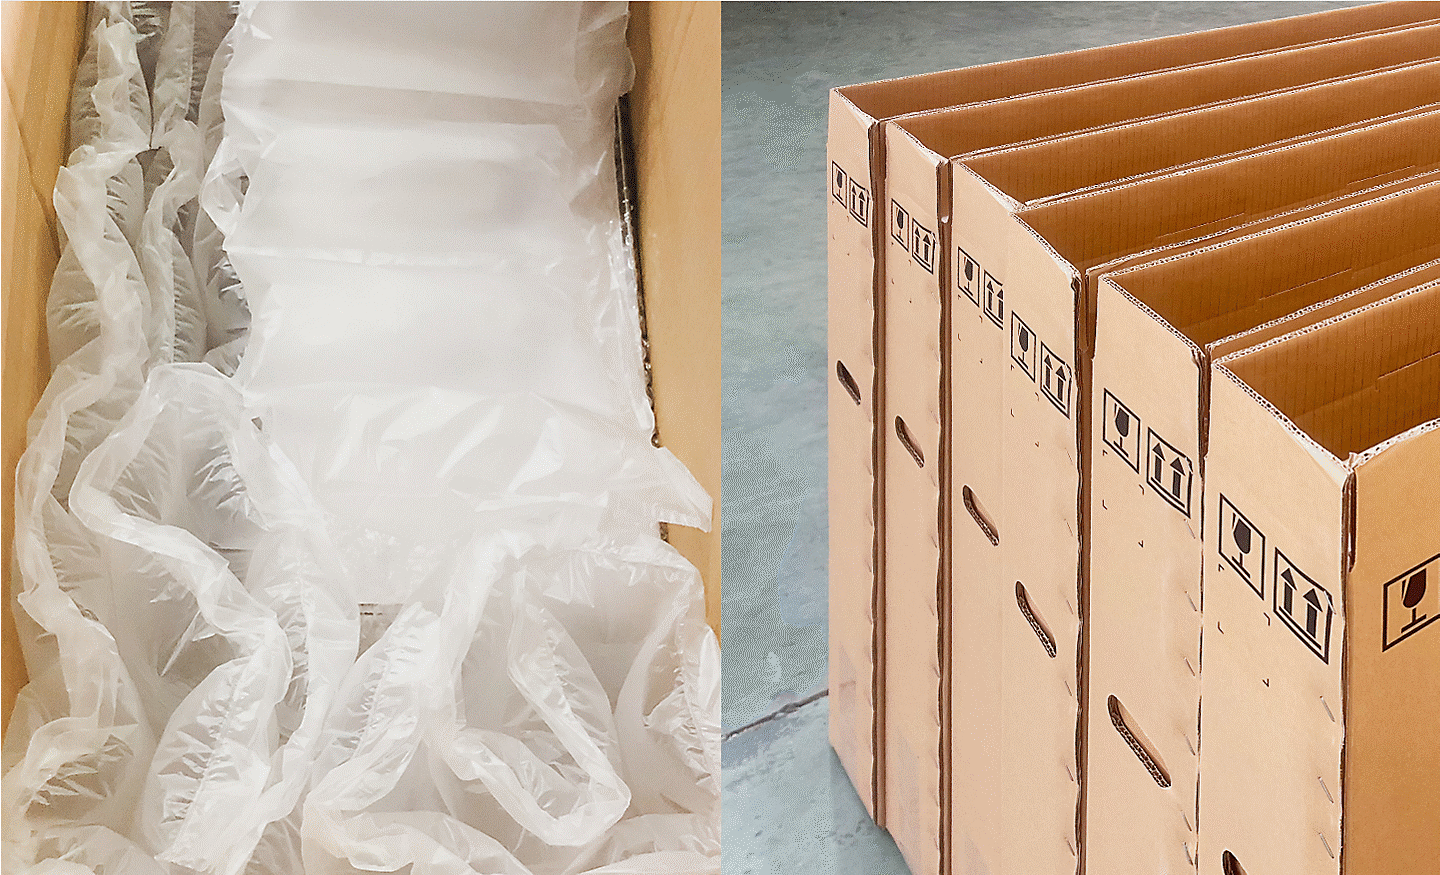 Images of cushioning airbags (left) and cardboard carton packaging (right) reused secondary materials used in manufacturing